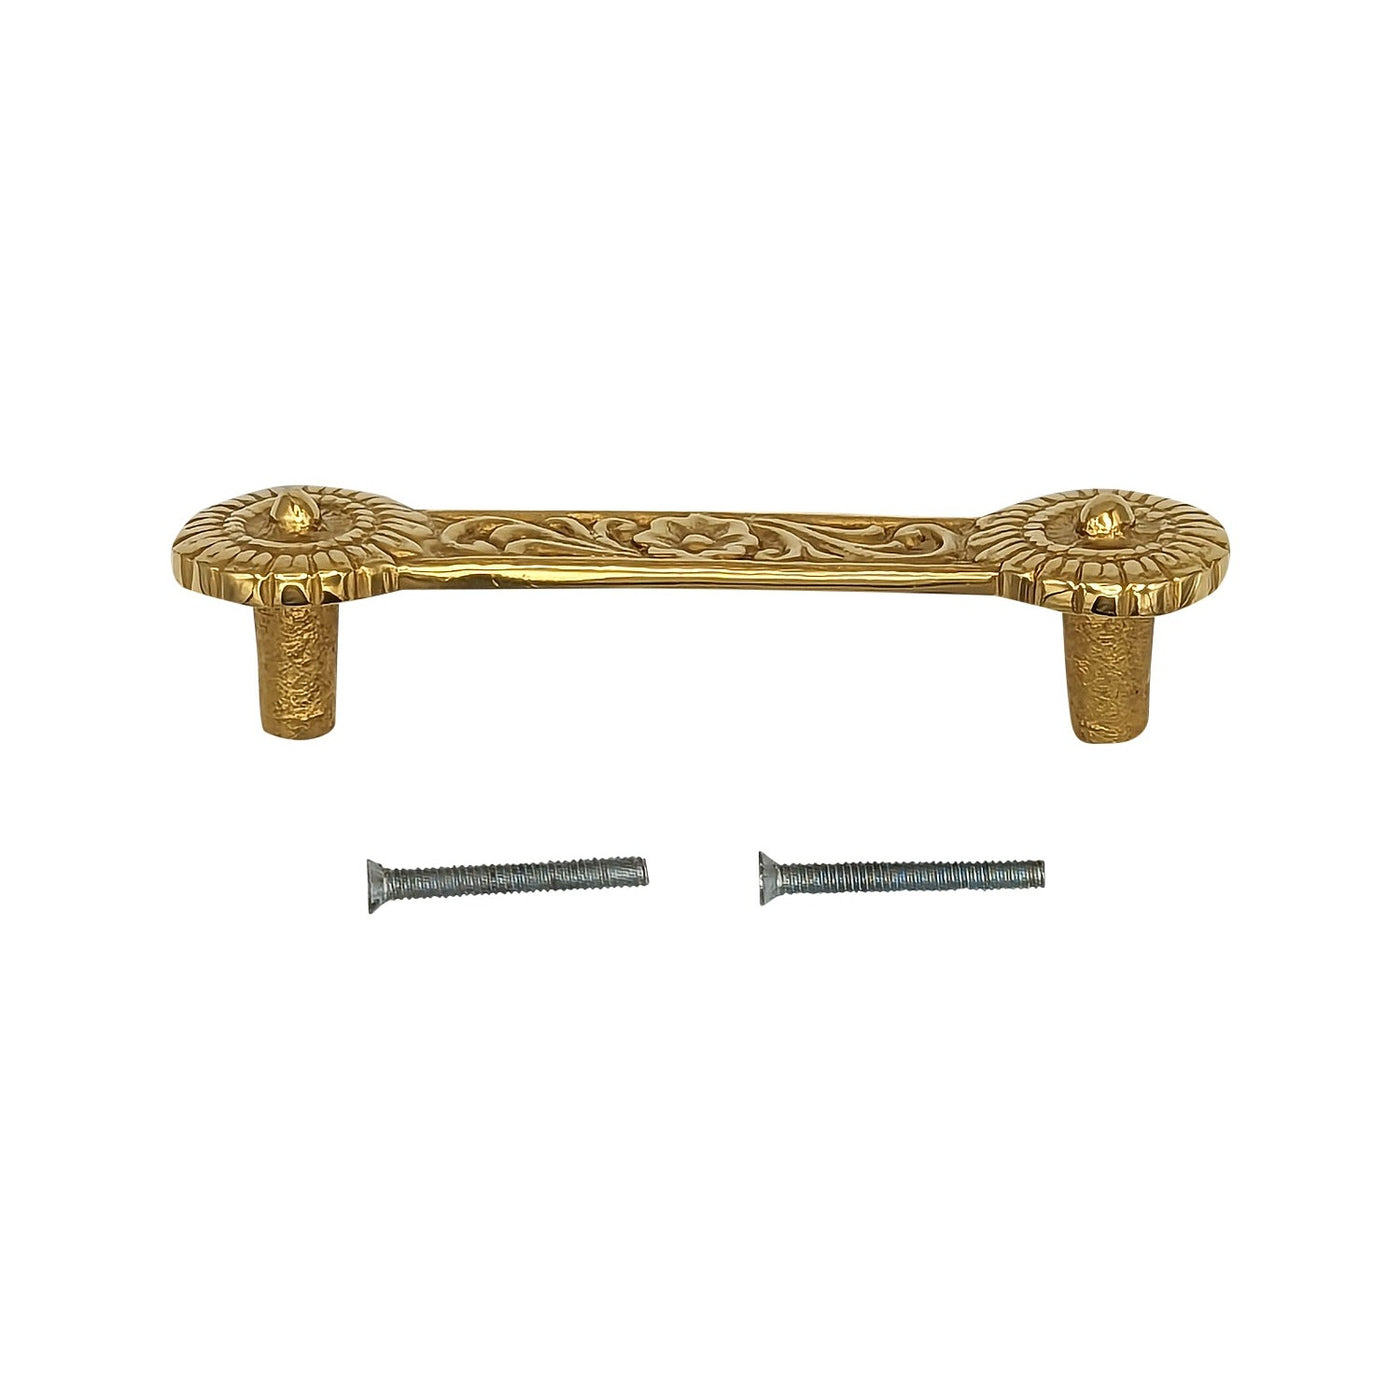 4 1/4 Inch Overall (3 3/8 Inch c-c) Solid Brass Unique Circle Pull Handle